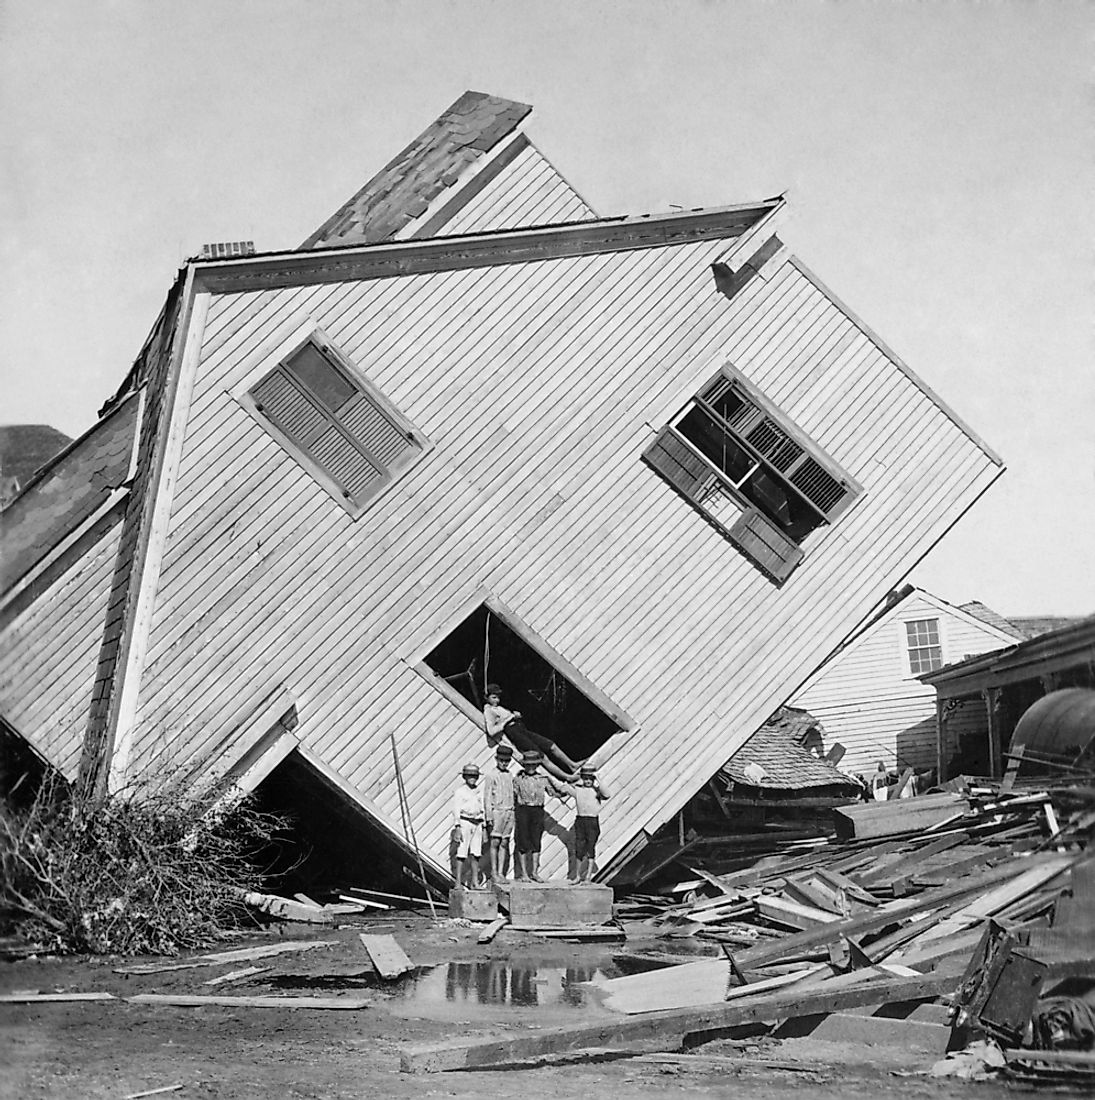 A house turned on its side from the force of the disastrous Galveston Hurricane in 1900. Editorial credit: Everett Historical / Shutterstock.com.